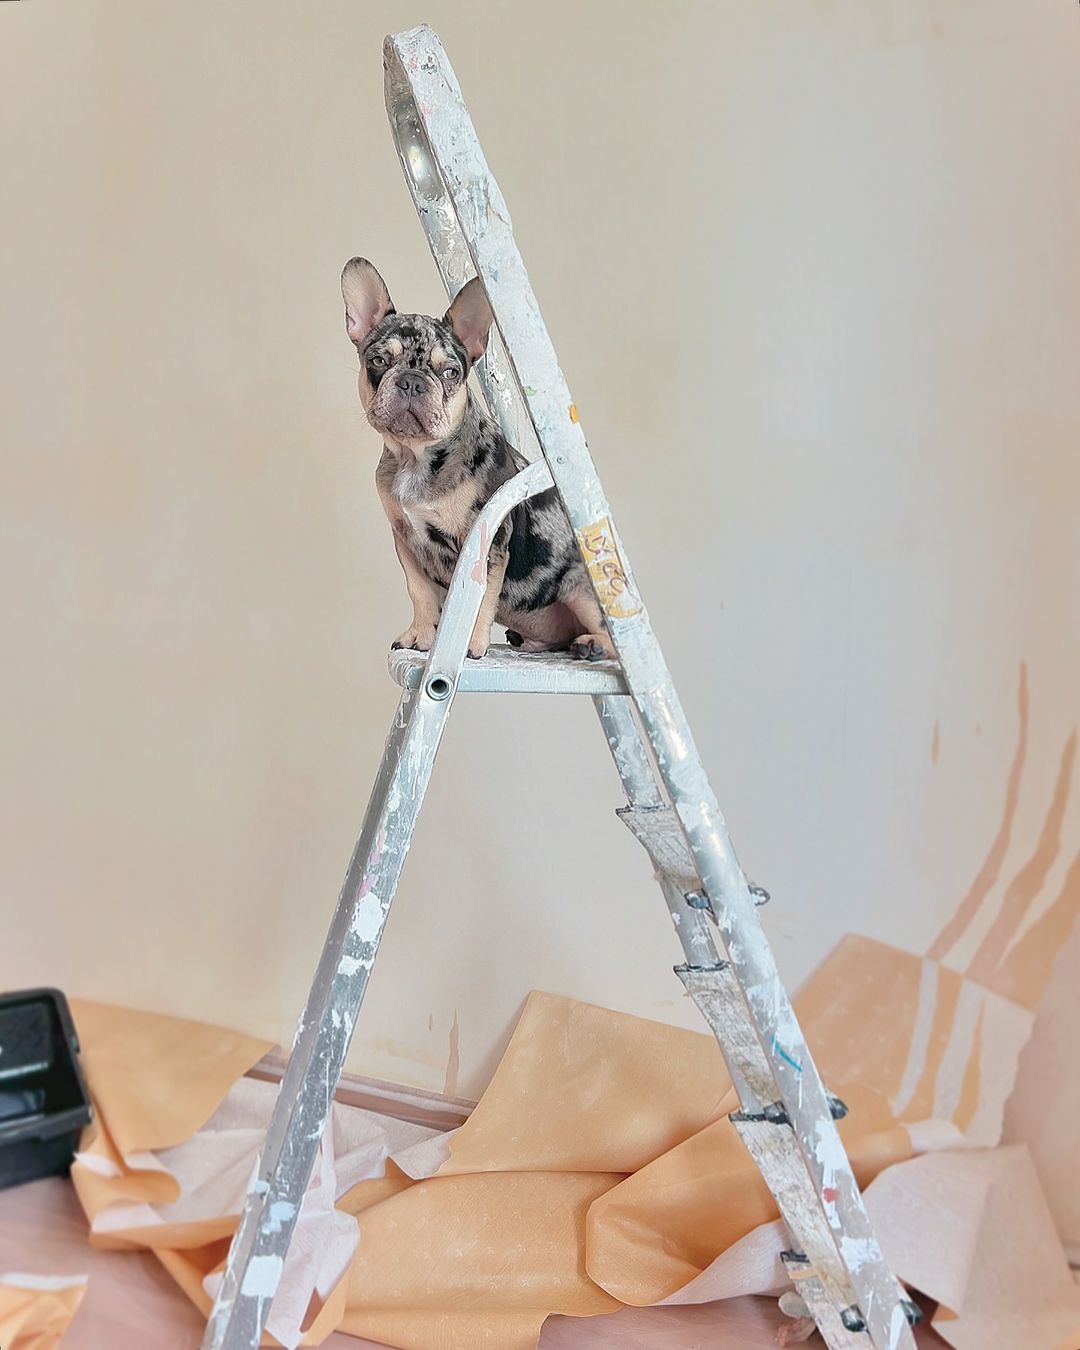 a cute dog sitting on a ladder waiting for the artist to complete the wall mural installation in a living room